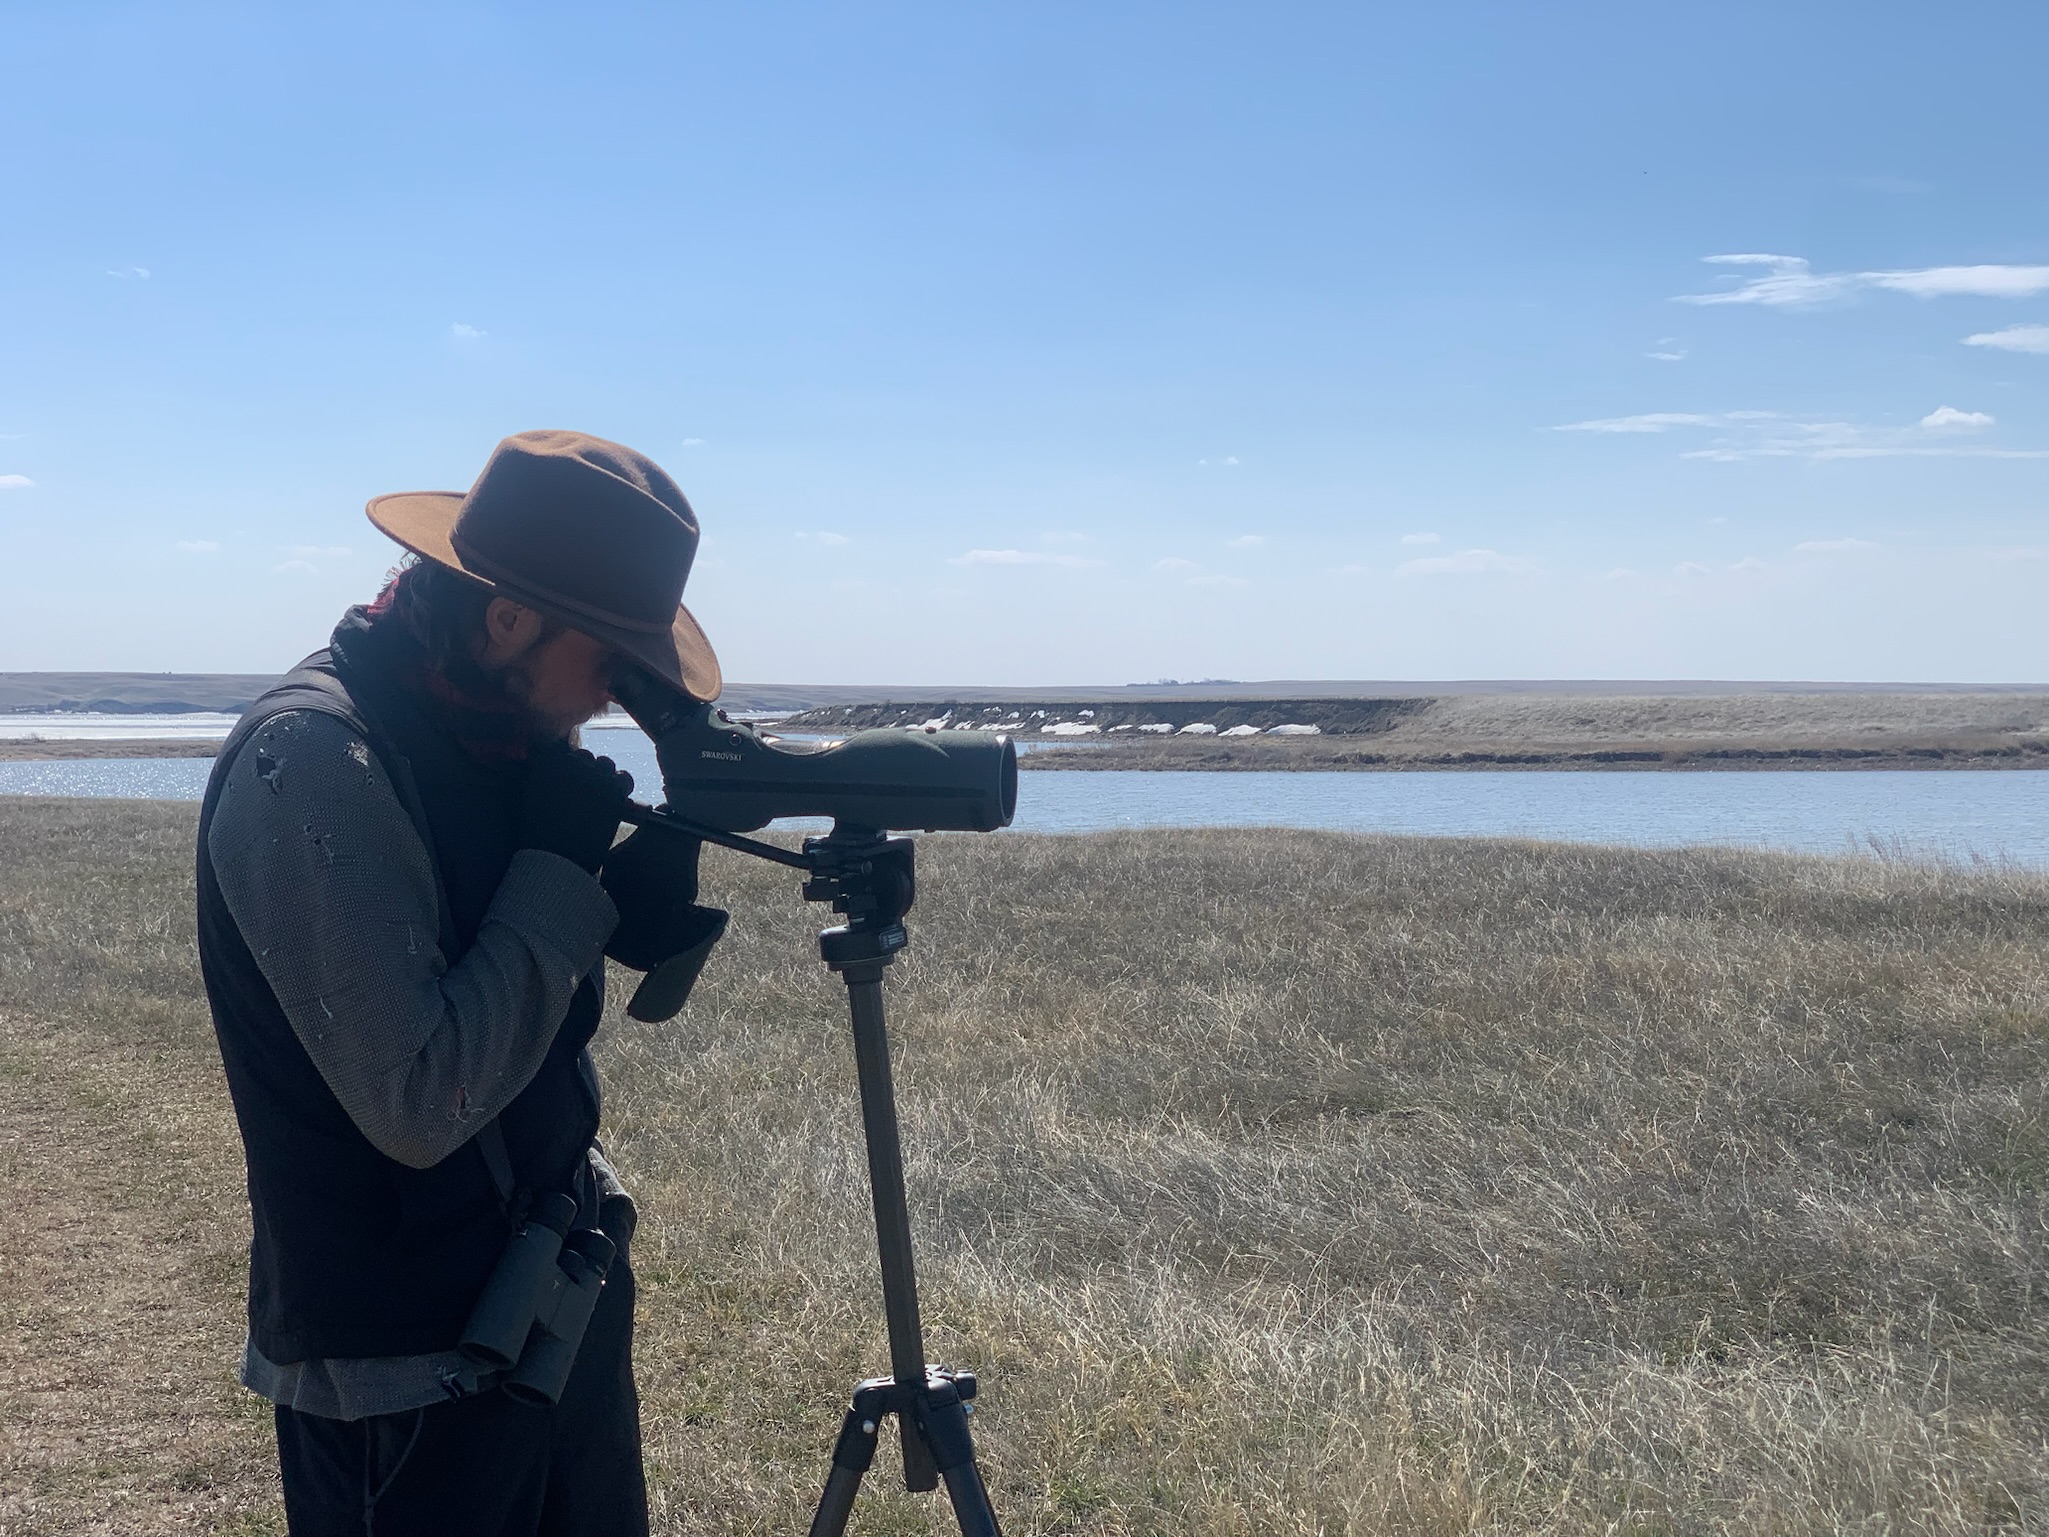 A biologist is looking through a spotting telescope across the landscape and water. blue sky and white clouds are in the background and there is dry brown vegetation in the foreground.